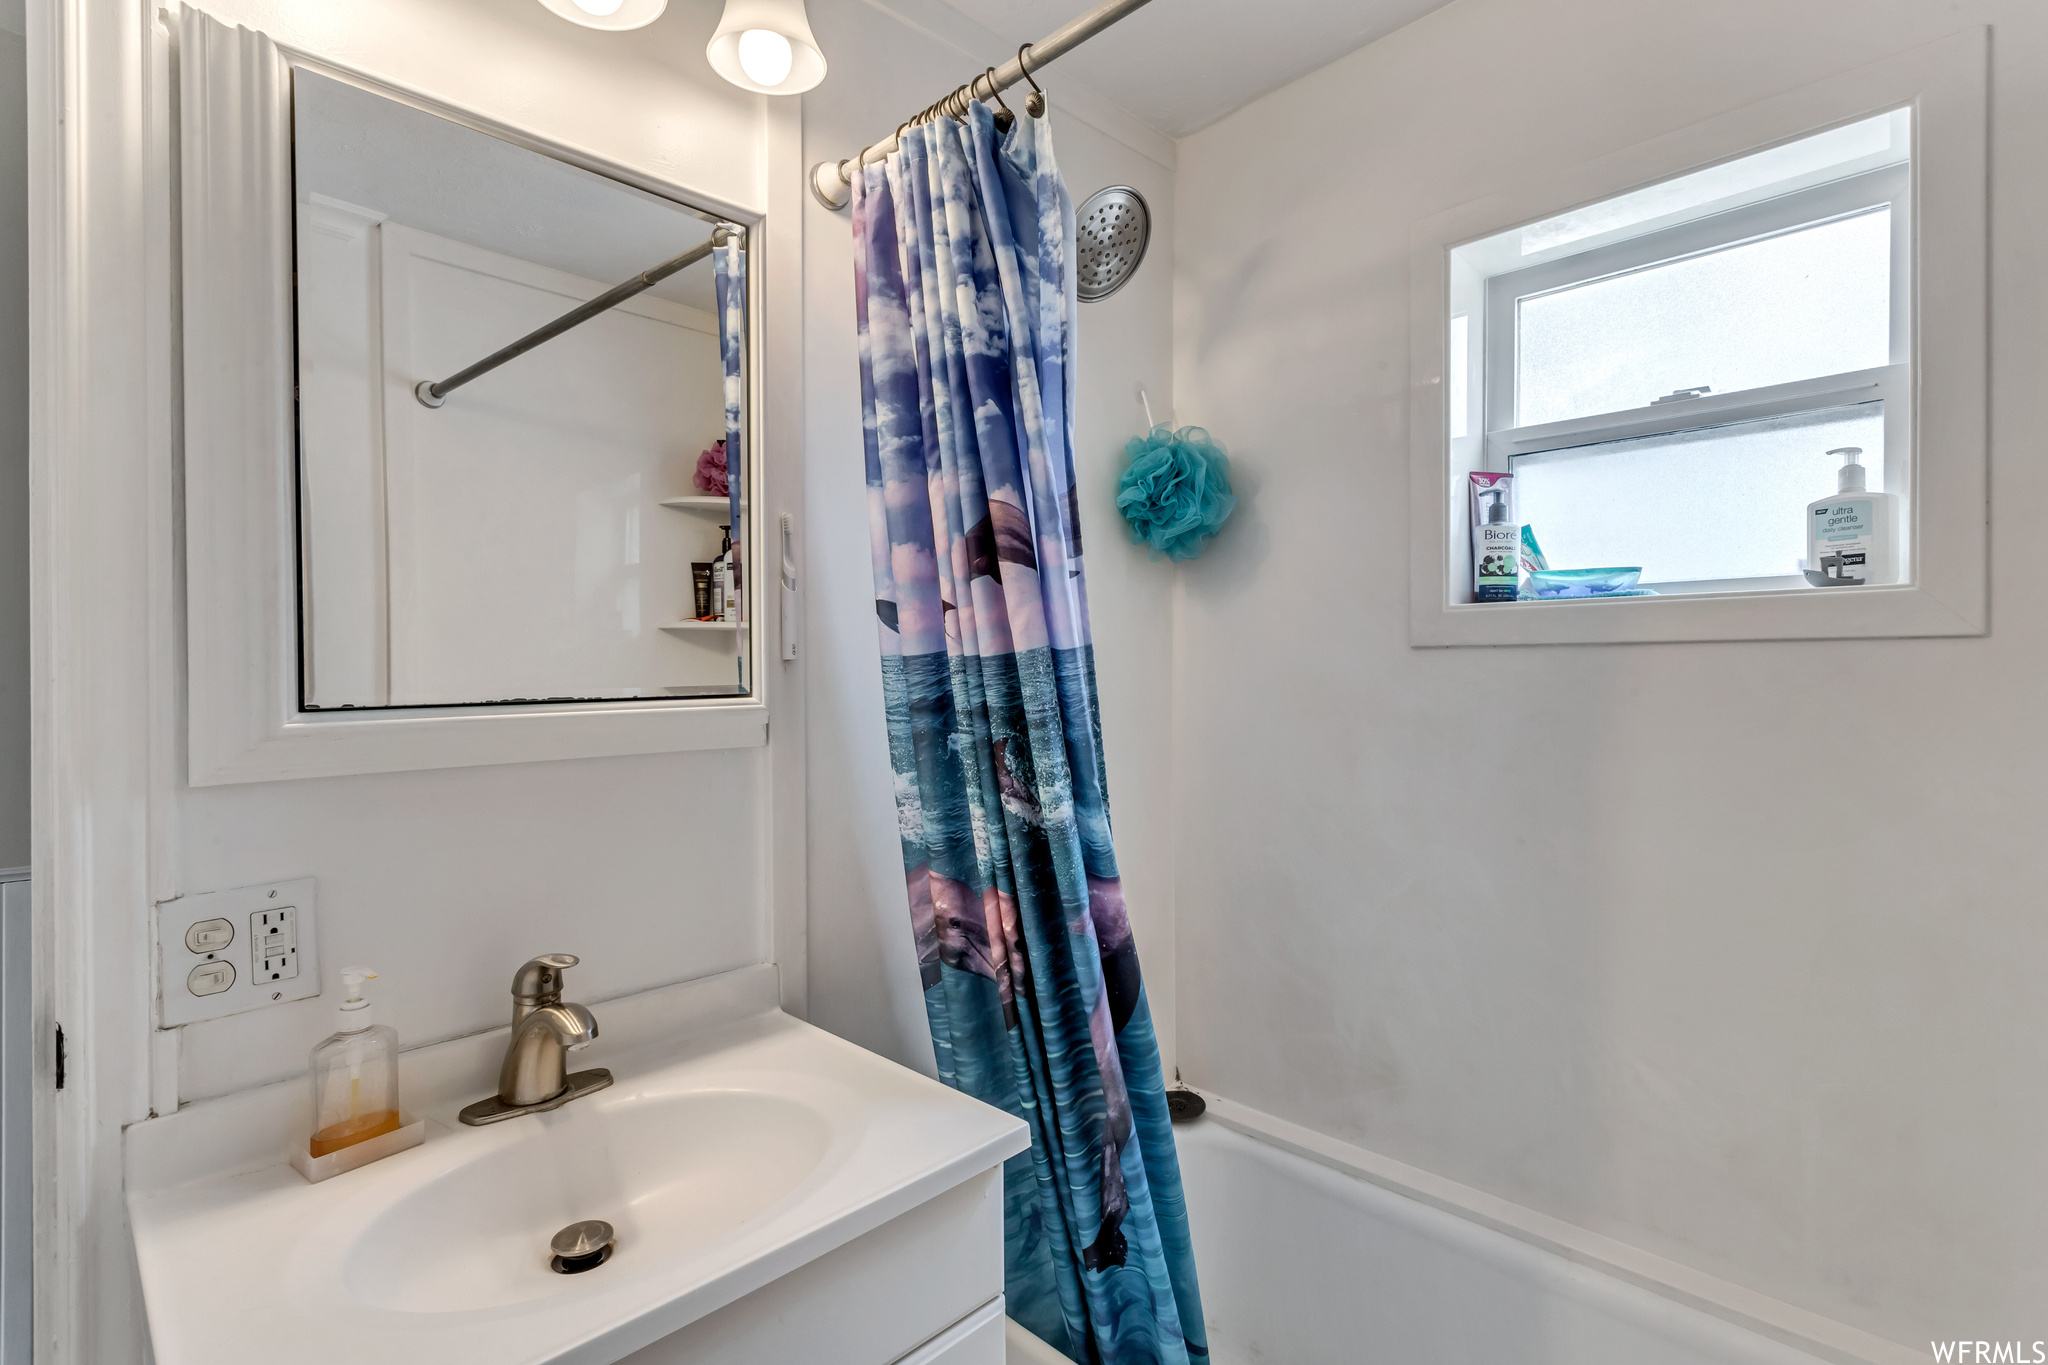 Full bathroom with vanity with cabinet space, mirror, shower / tub combo, frosted glass window